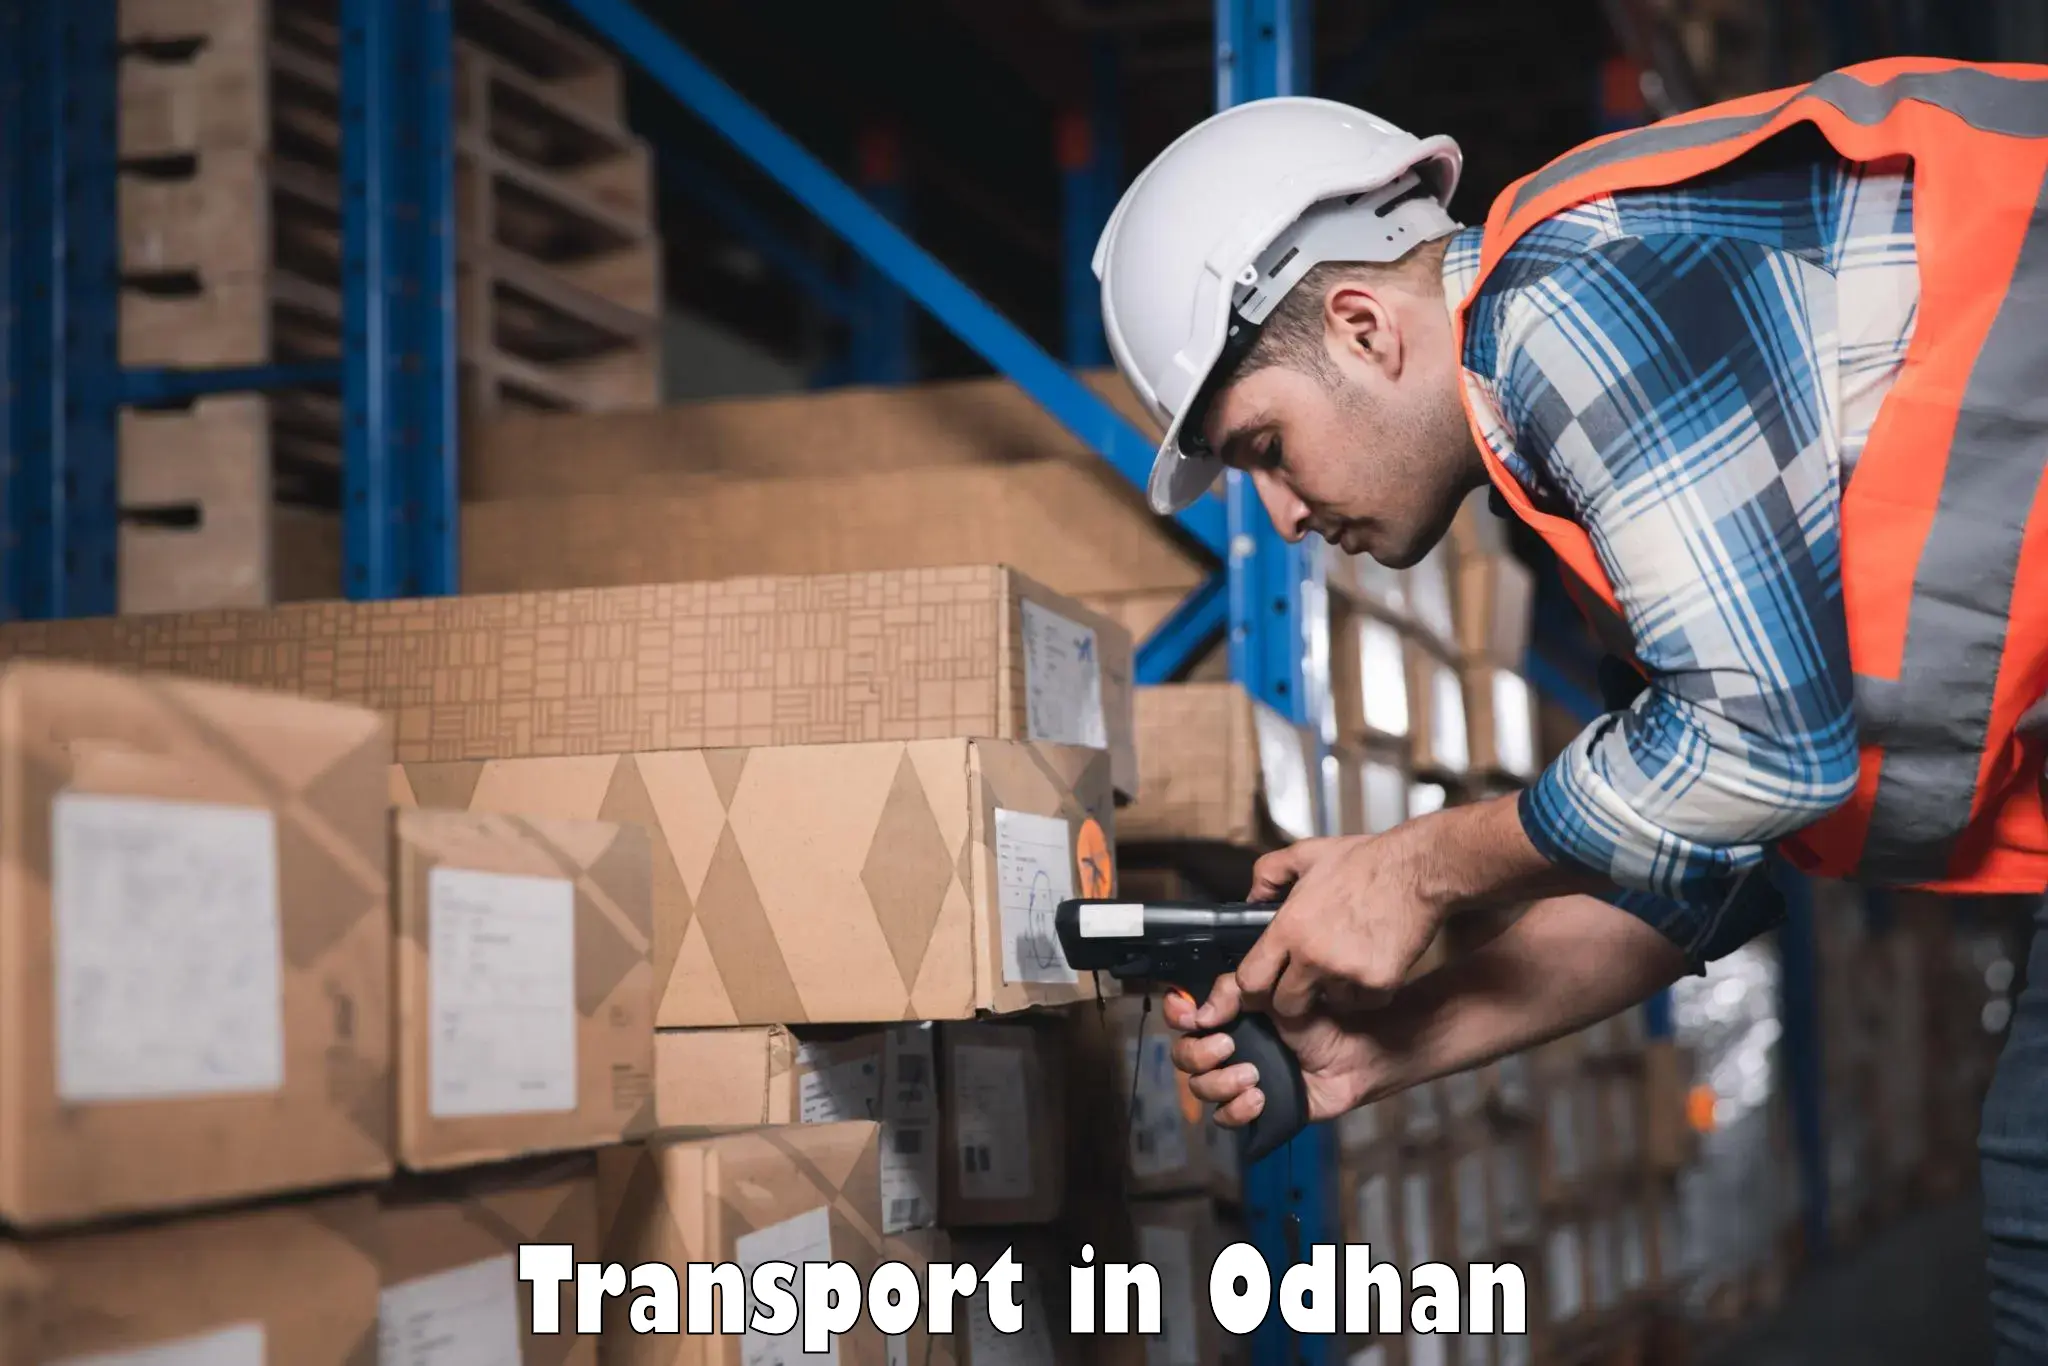 Road transport services in Odhan